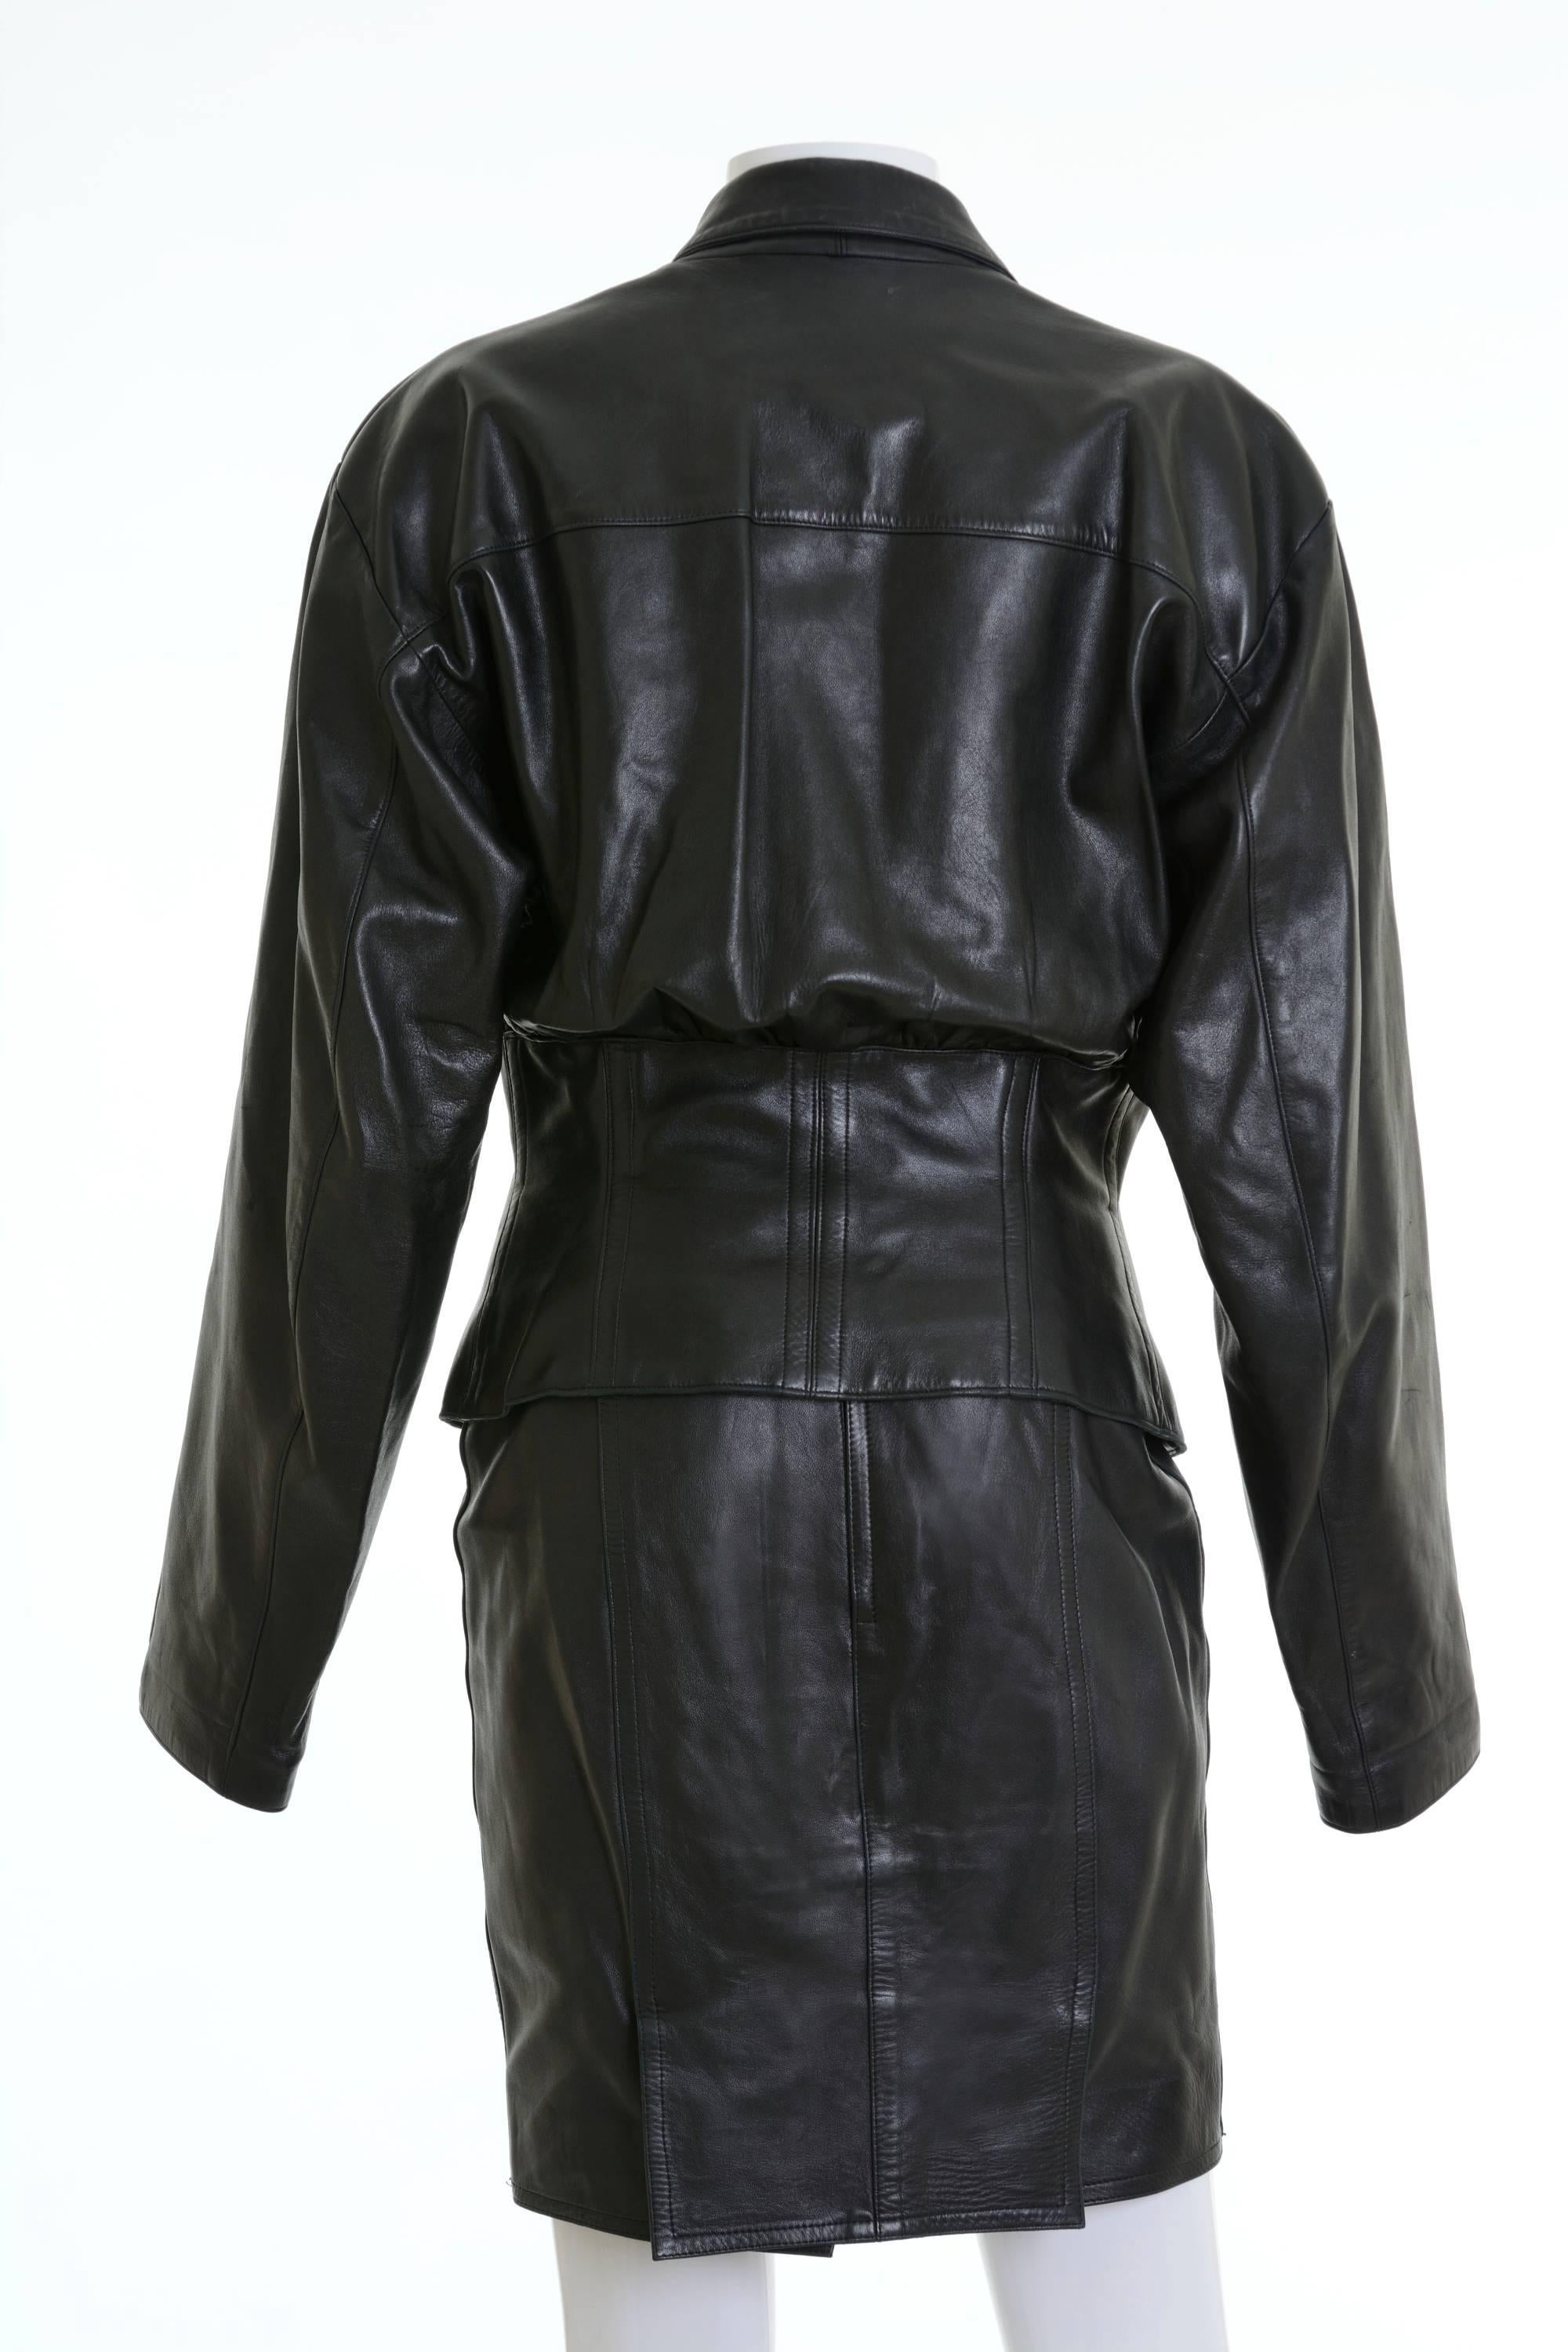 1980s Alaïa Jacket & Skirt in a black leather fabric, fully lined in a acetate fabric, double-breasted closure jacket, framed lapel, buttons closure, waist cincher shape, left breast welt. Pencil skirt with back zip closure and snap, double kick